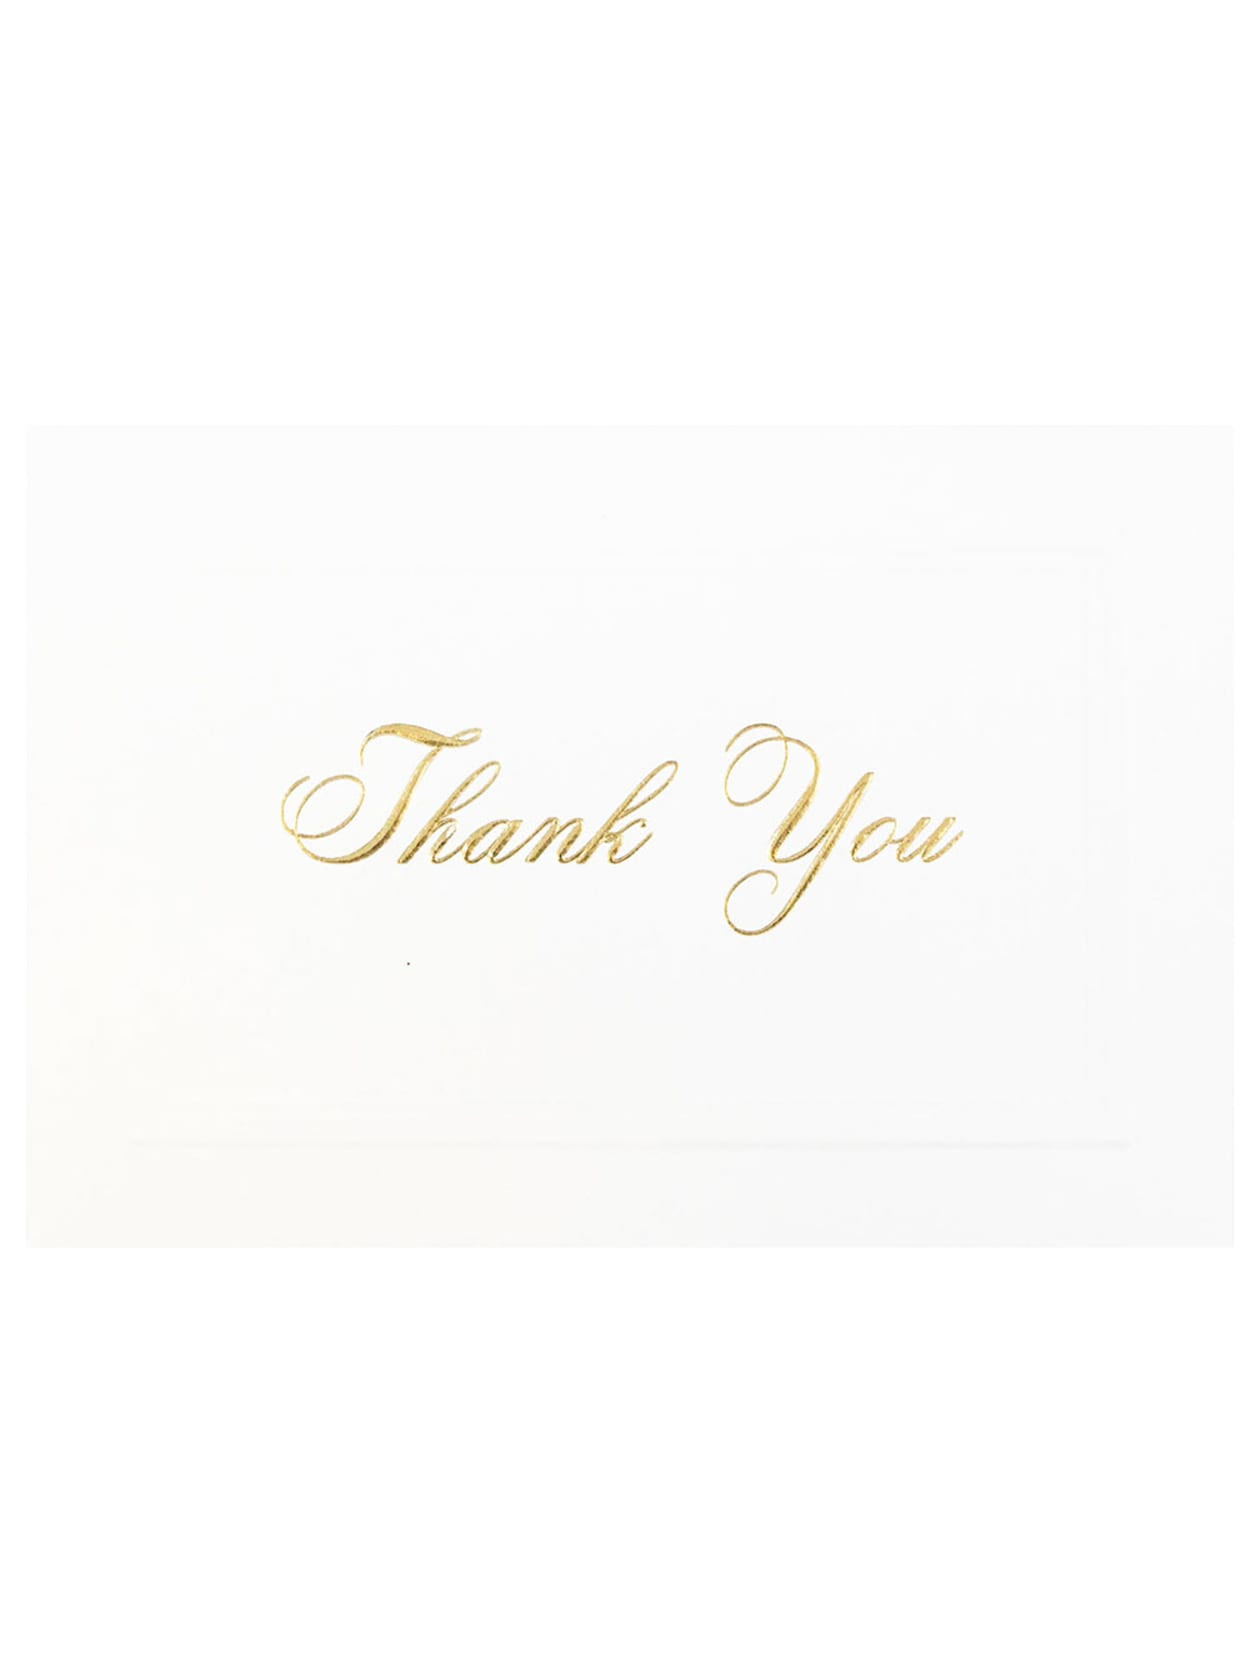 2 X3 Giant Thank You Card Jam Paper Thank You Card Set 4 78 X 3 38 80 Lb Bright